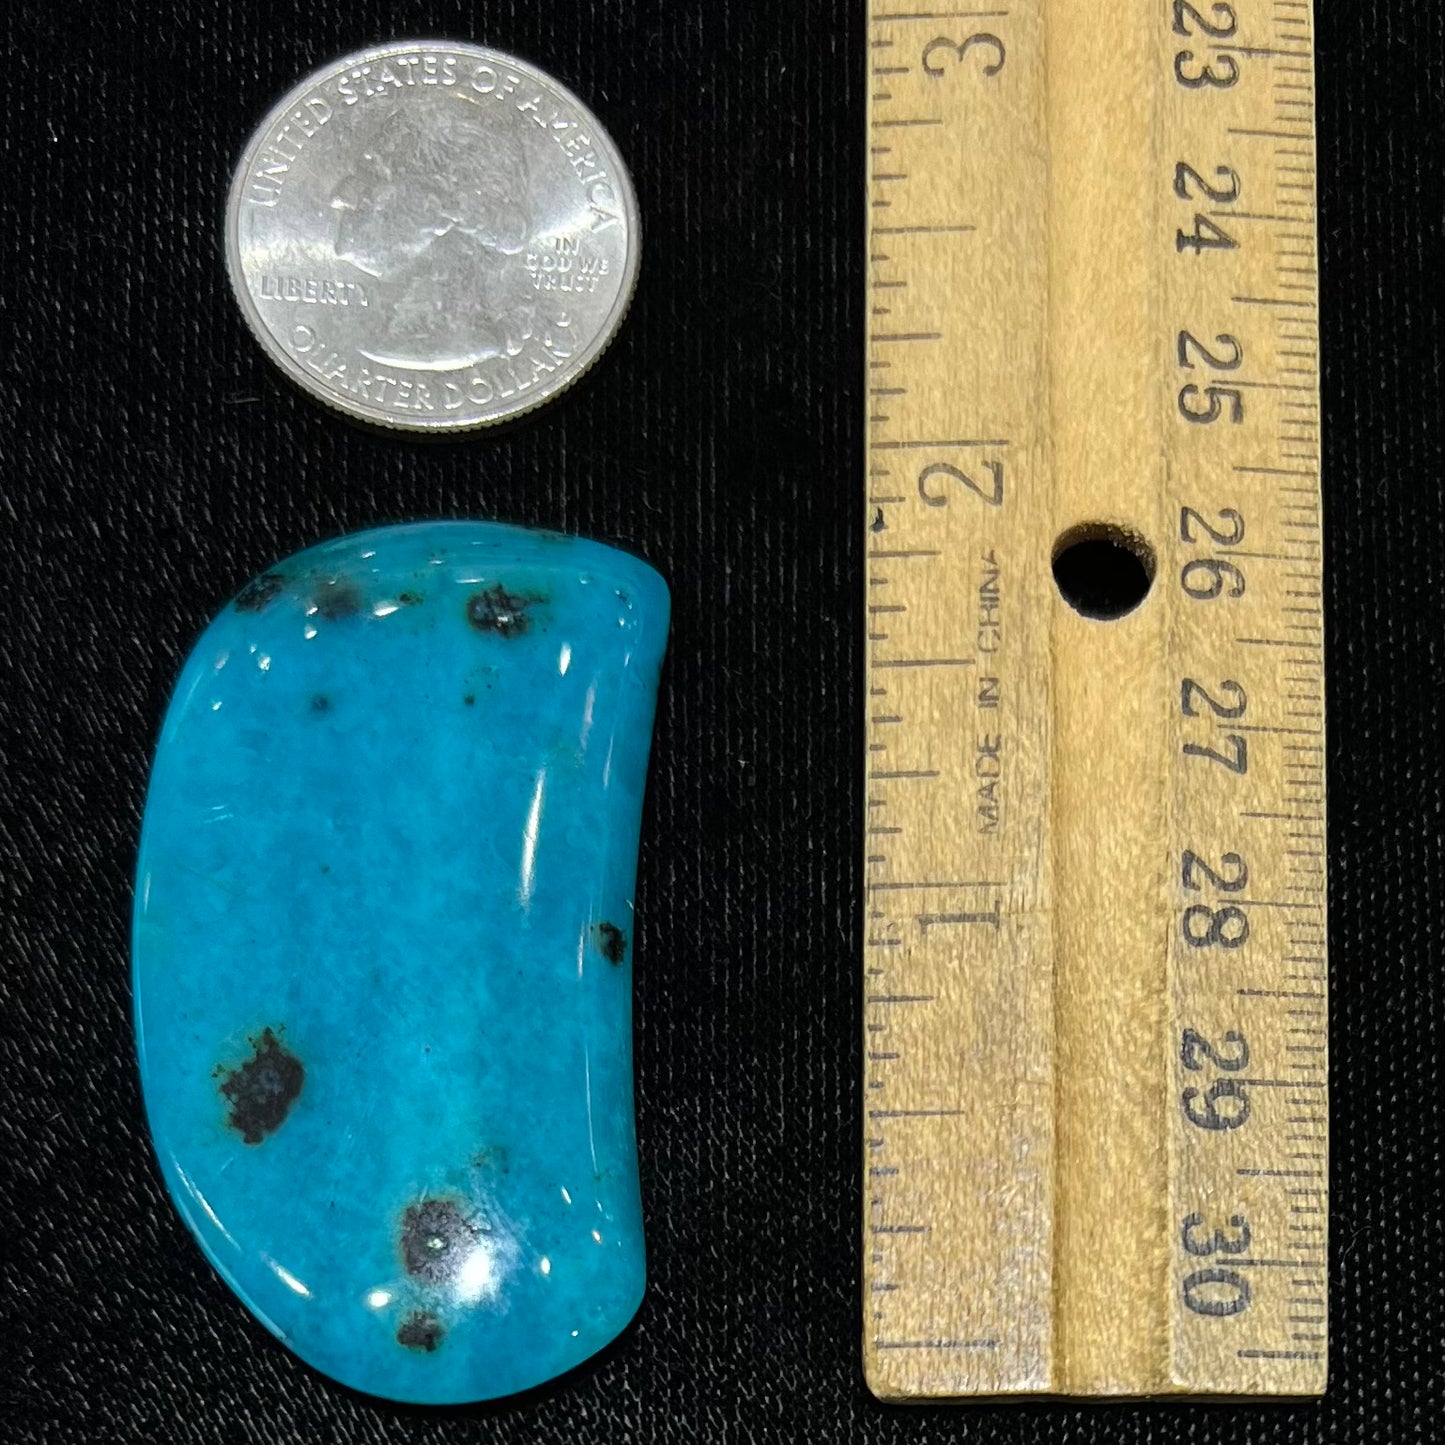 A loose, polished, spotted blue chrysocolla stone.